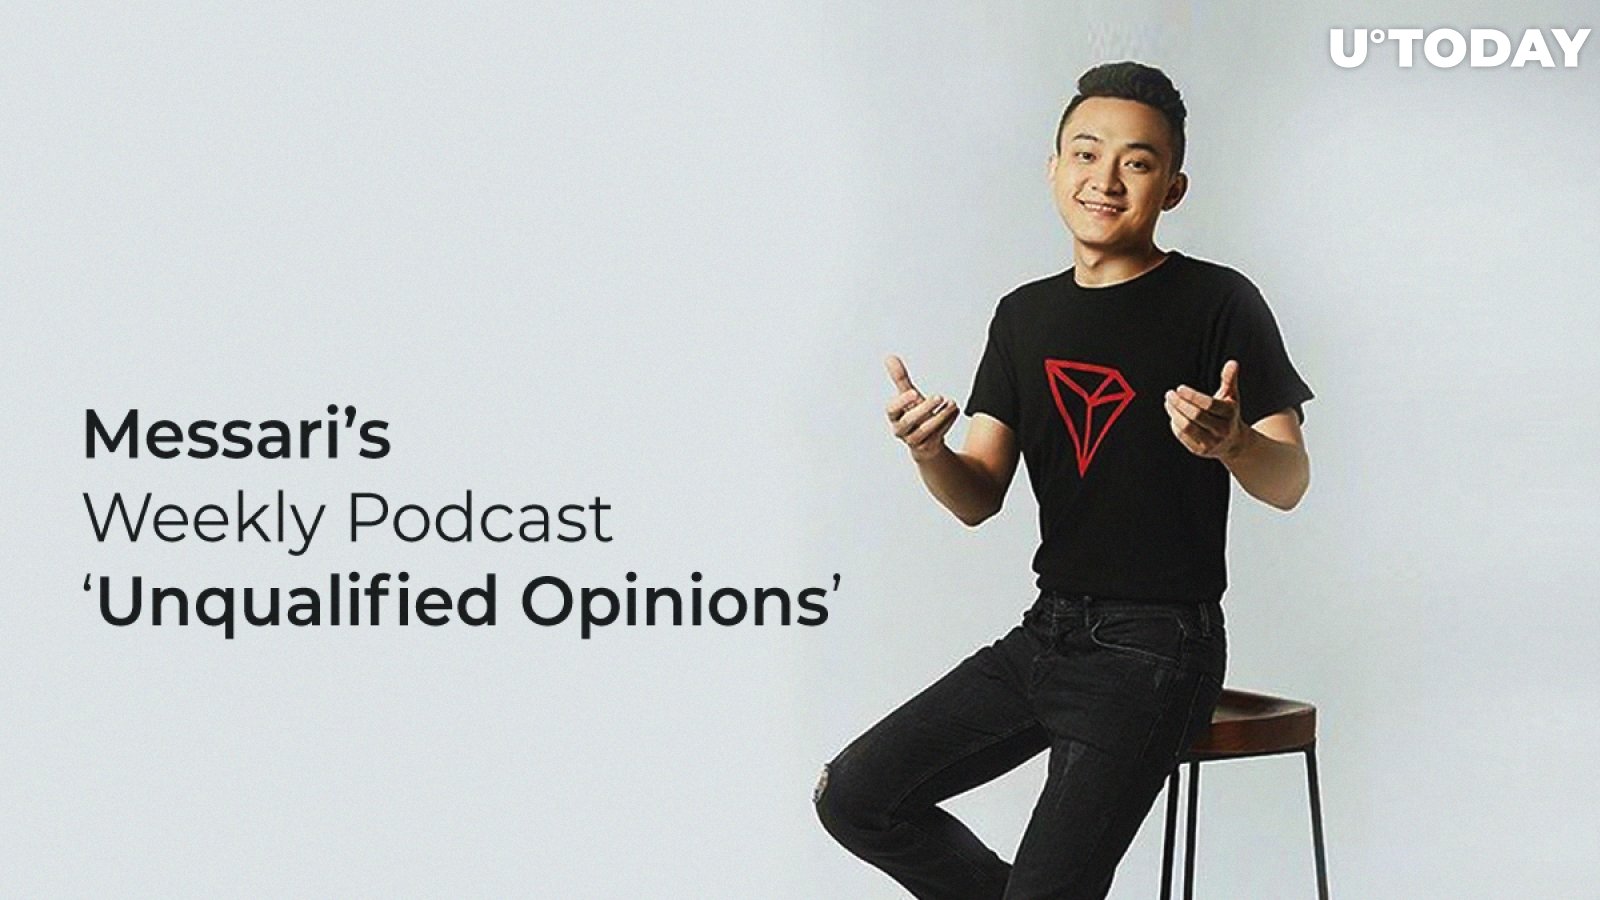 Tron TRX CEO Justin Sun Joins Messari’s Weekly Podcast ‘Unqualified Opinions’